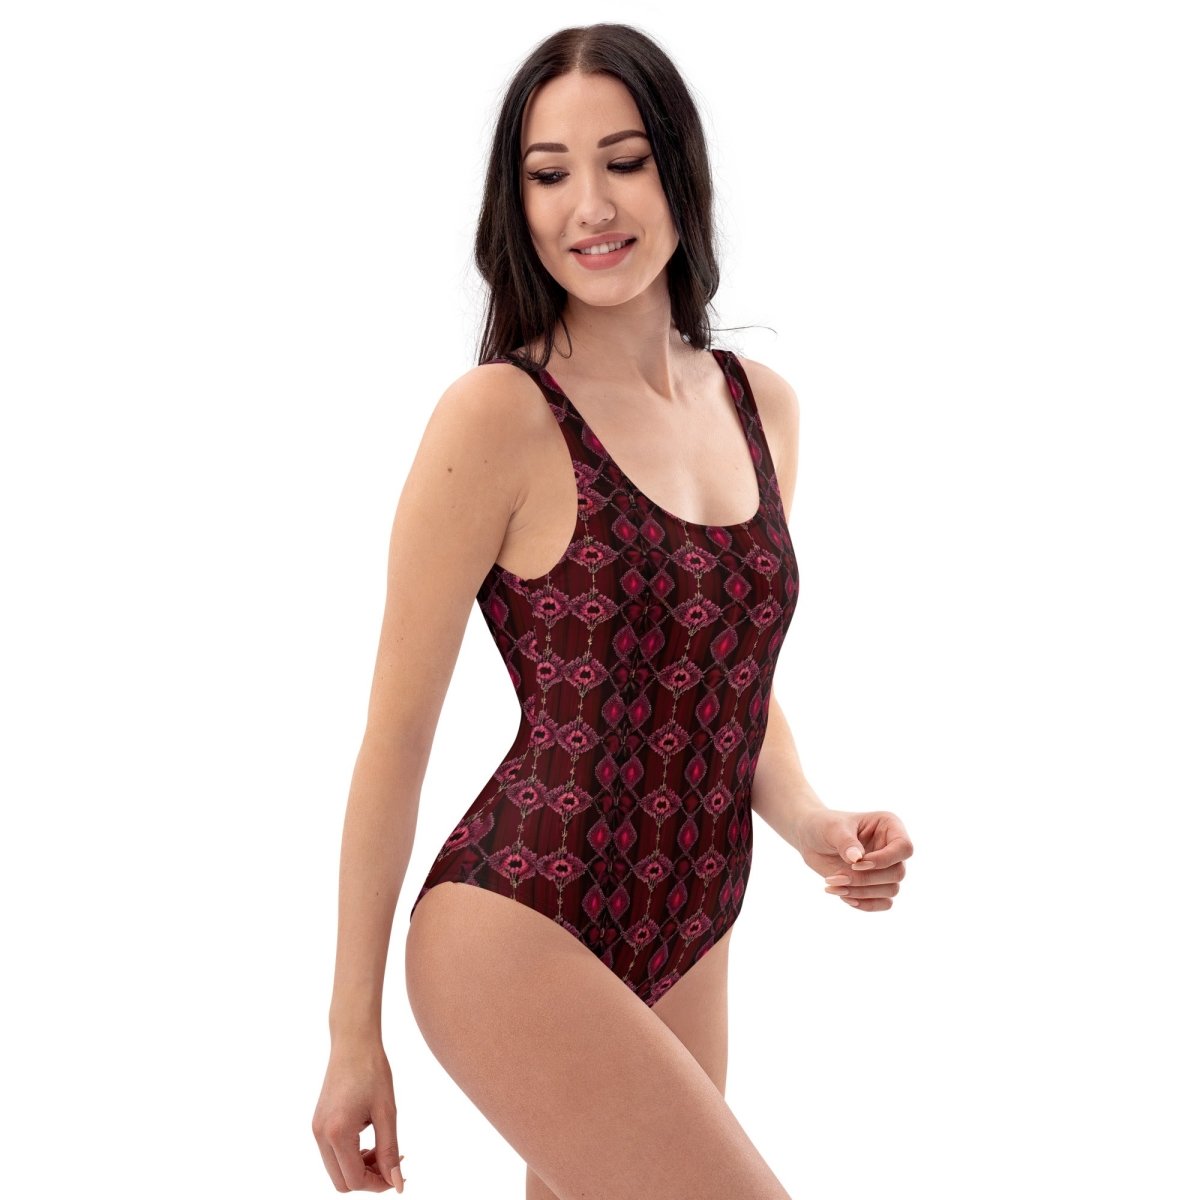 Sefira Collection One-Piece Swimsuit | Sefira Beach Collection Woman - Sefira Collections